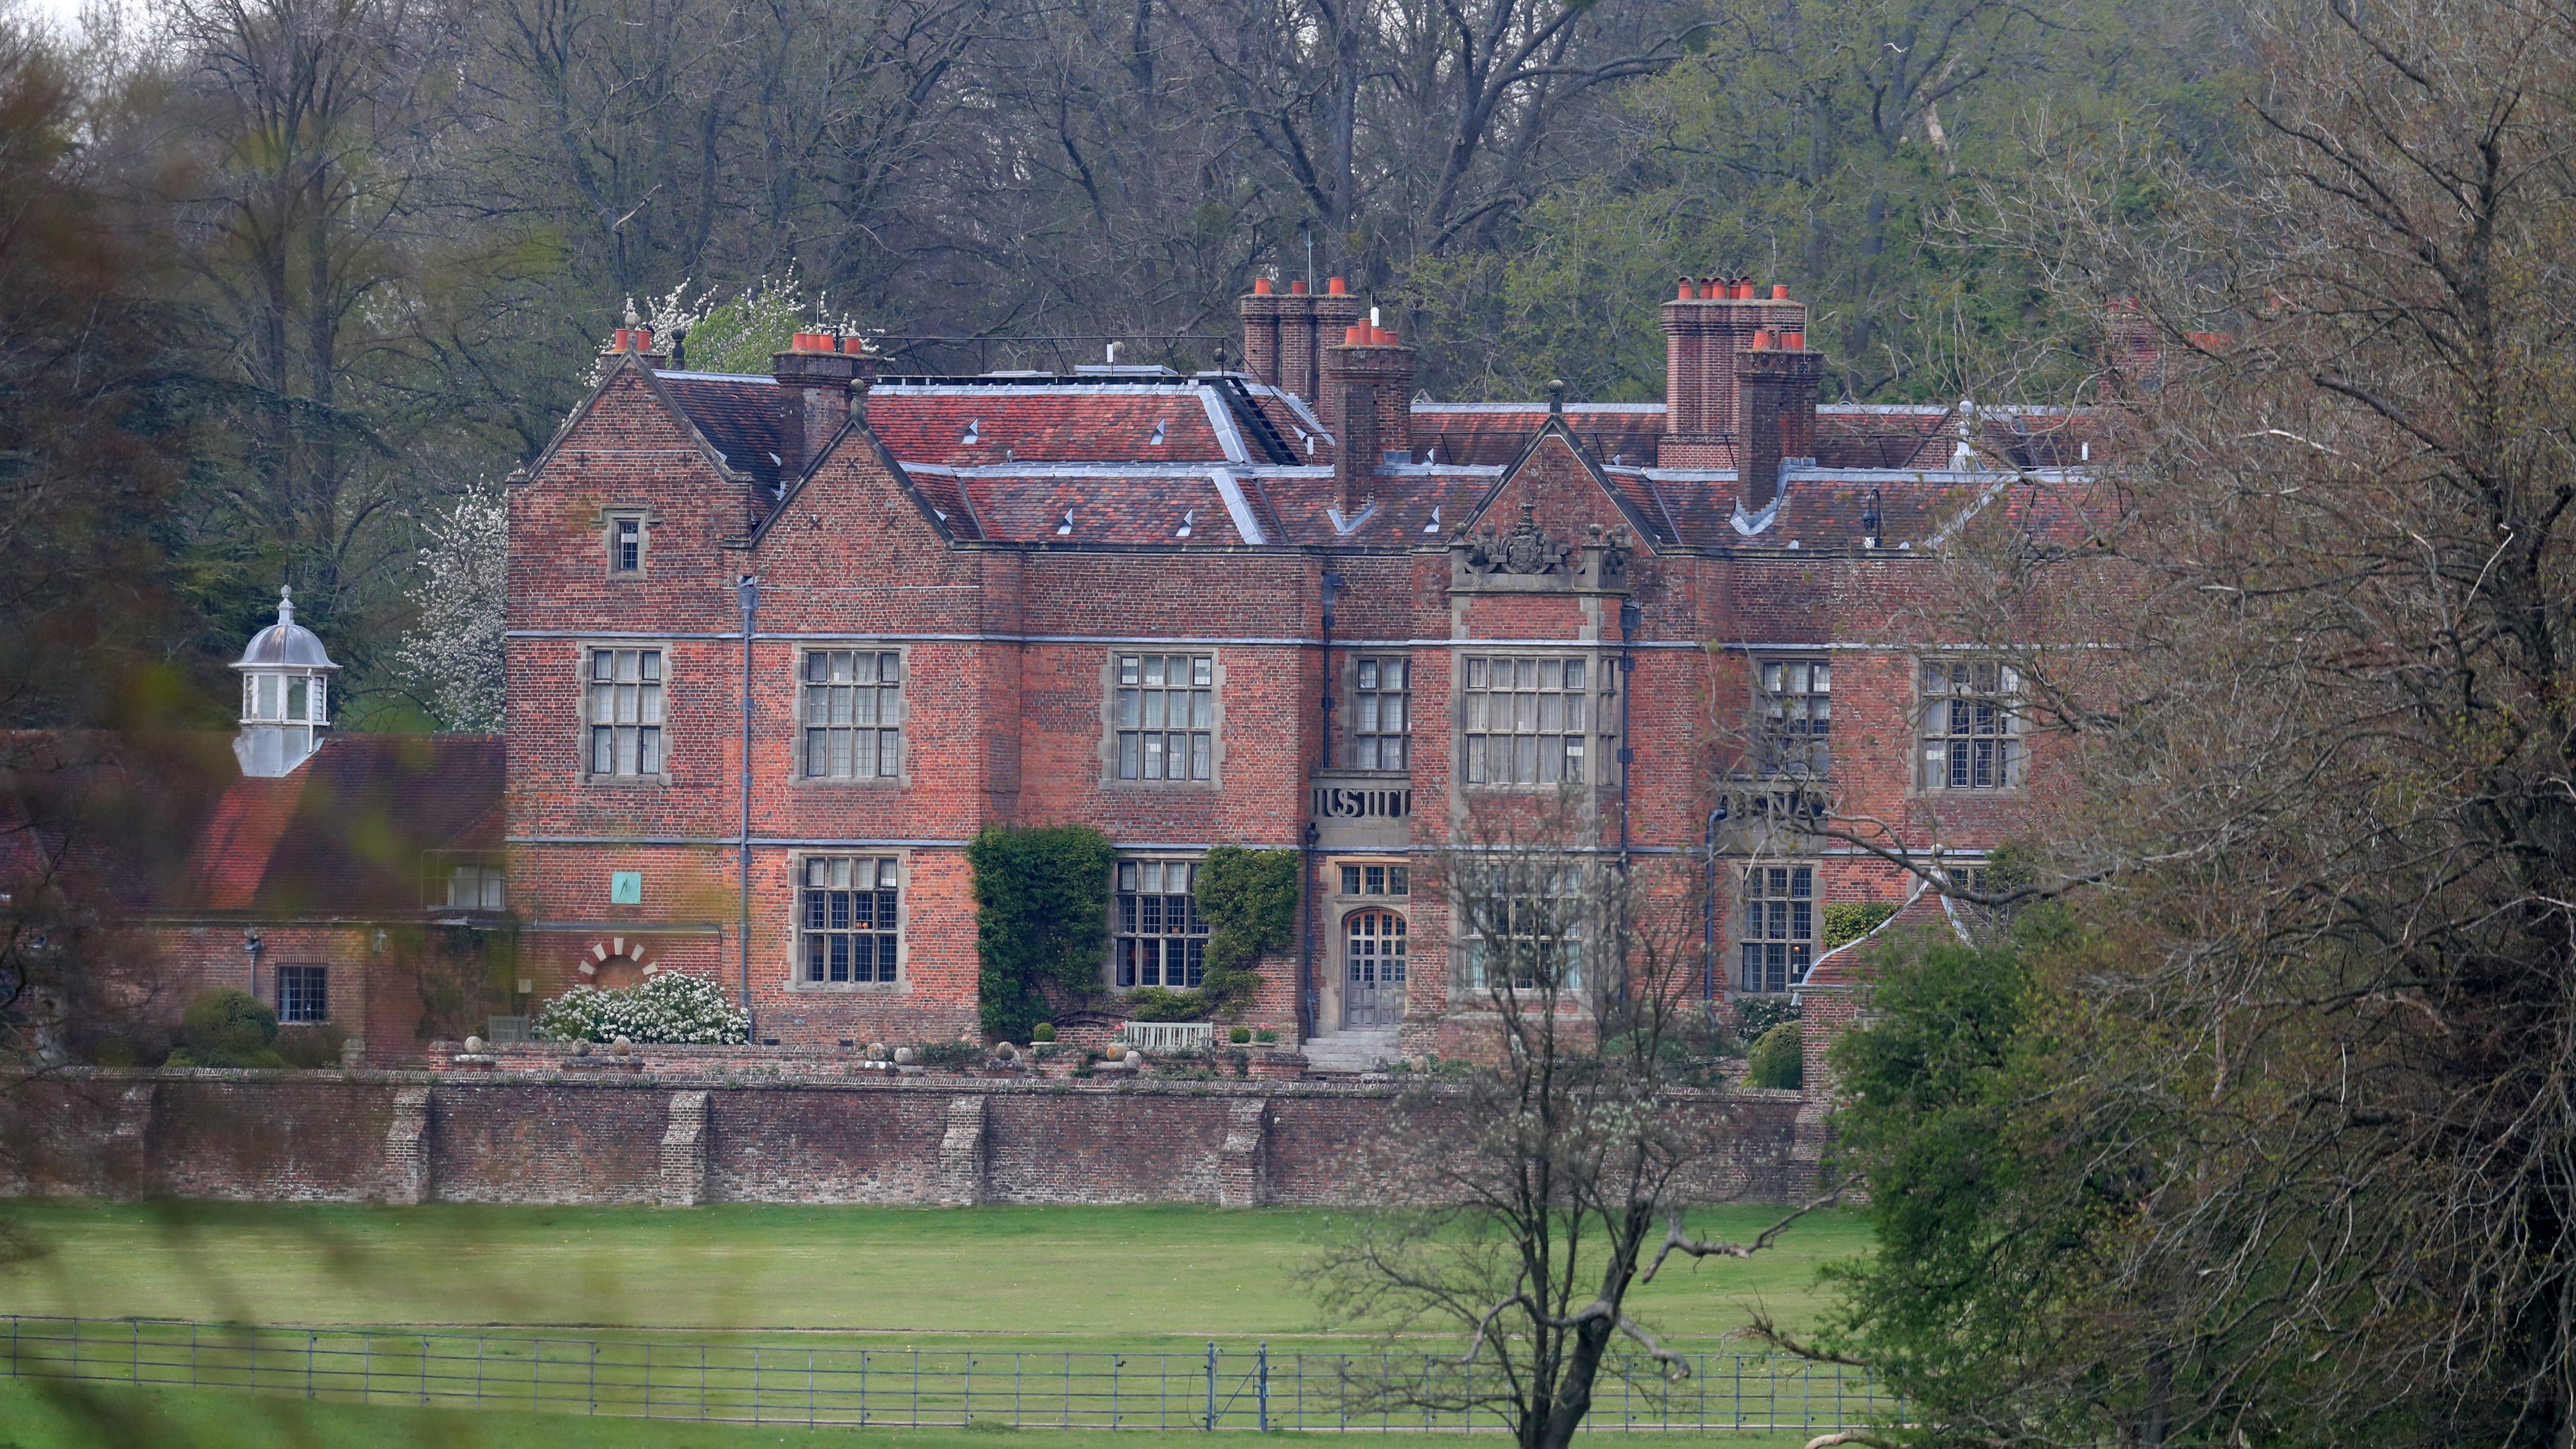 External view of Chequers